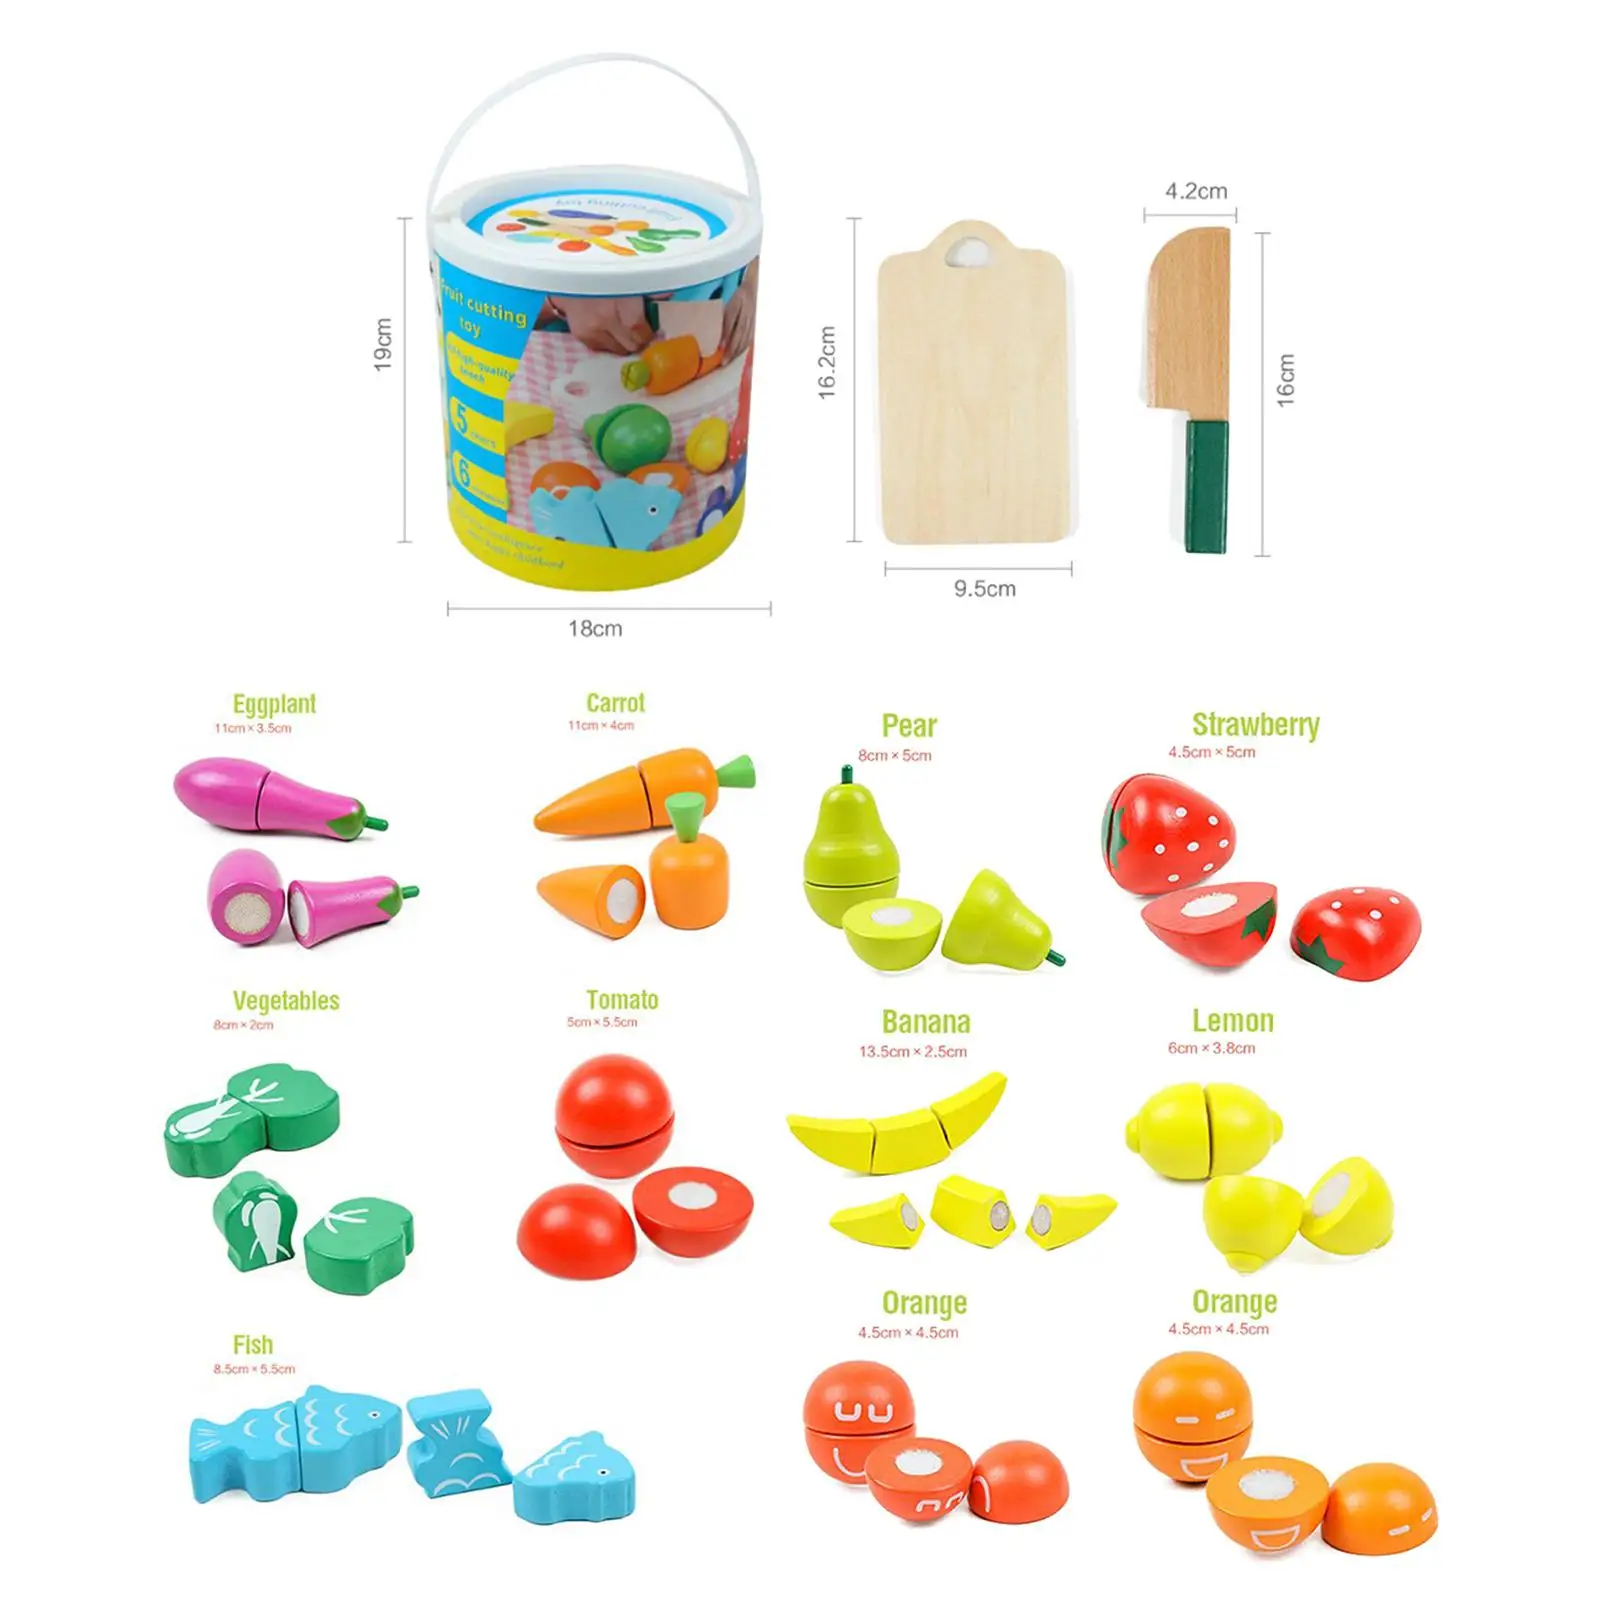 Play Food Toy Early Learning Motor Skills Montessori Toys Pretend Kitchen Toys for Kids Children Toddlers Ages 1 2 3 Gift